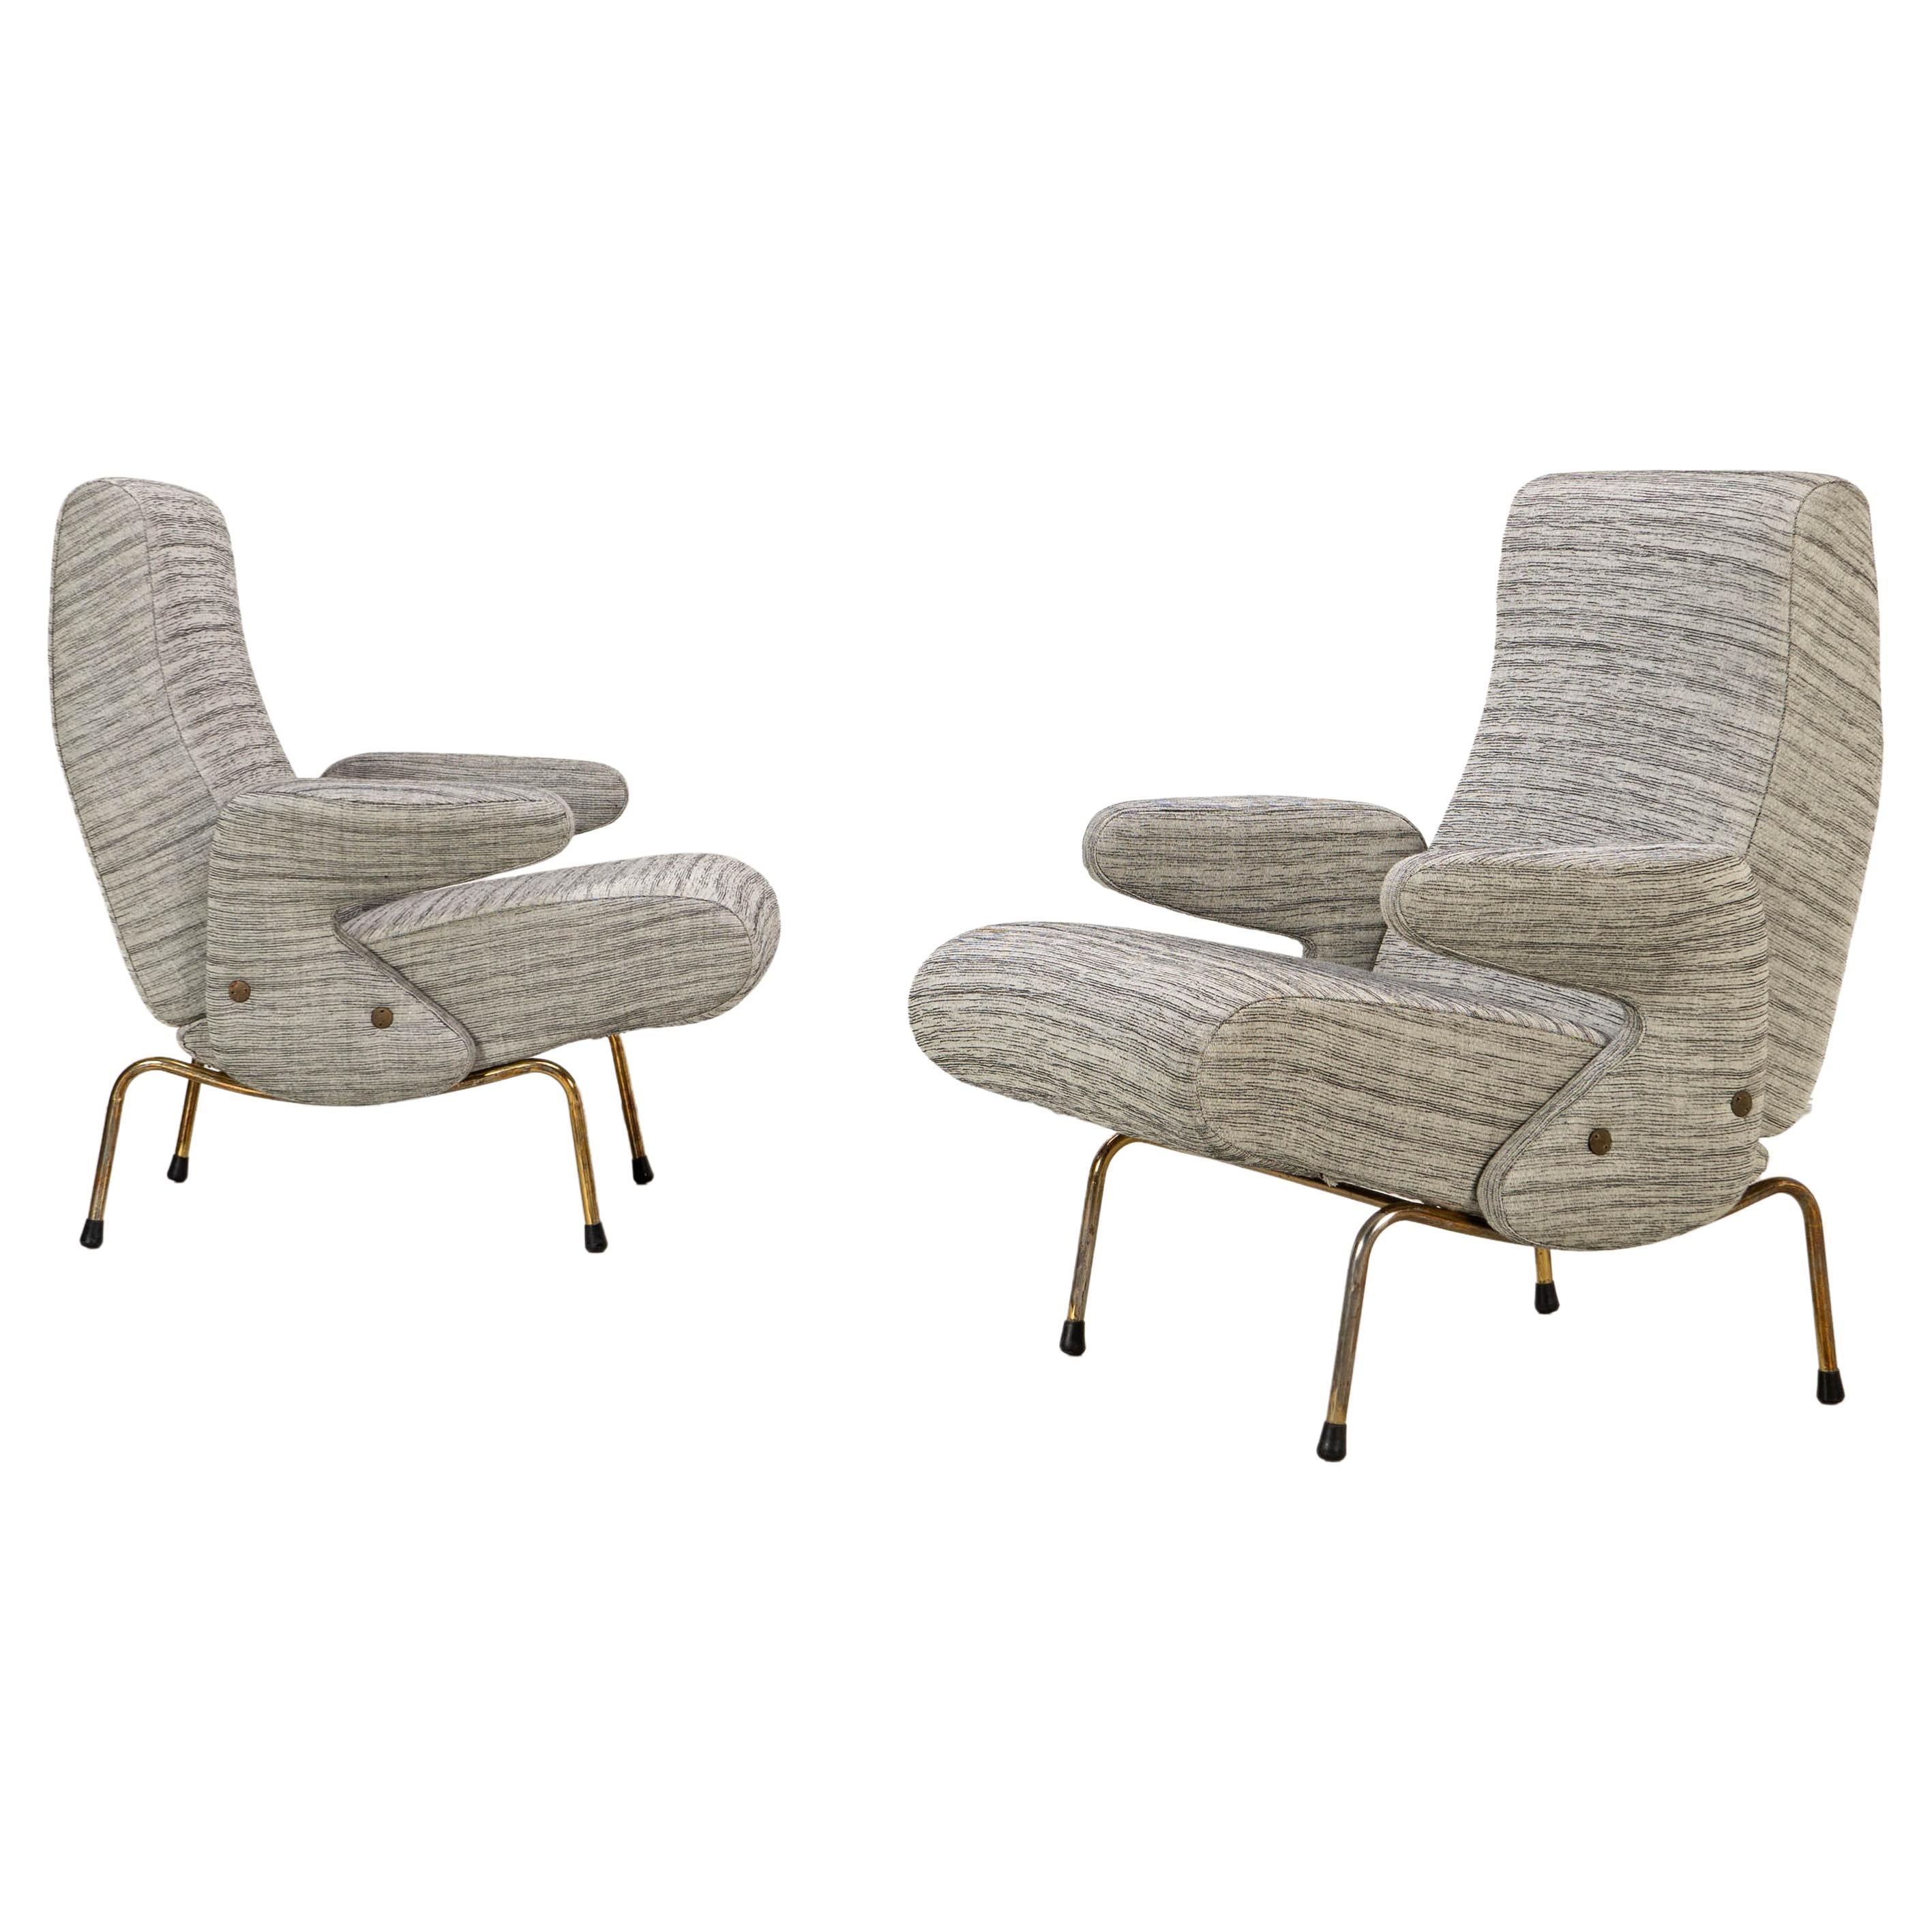 Set of Two Club Chairs "Delfino" by Erberto Carboni for Arflex, 1950s For Sale